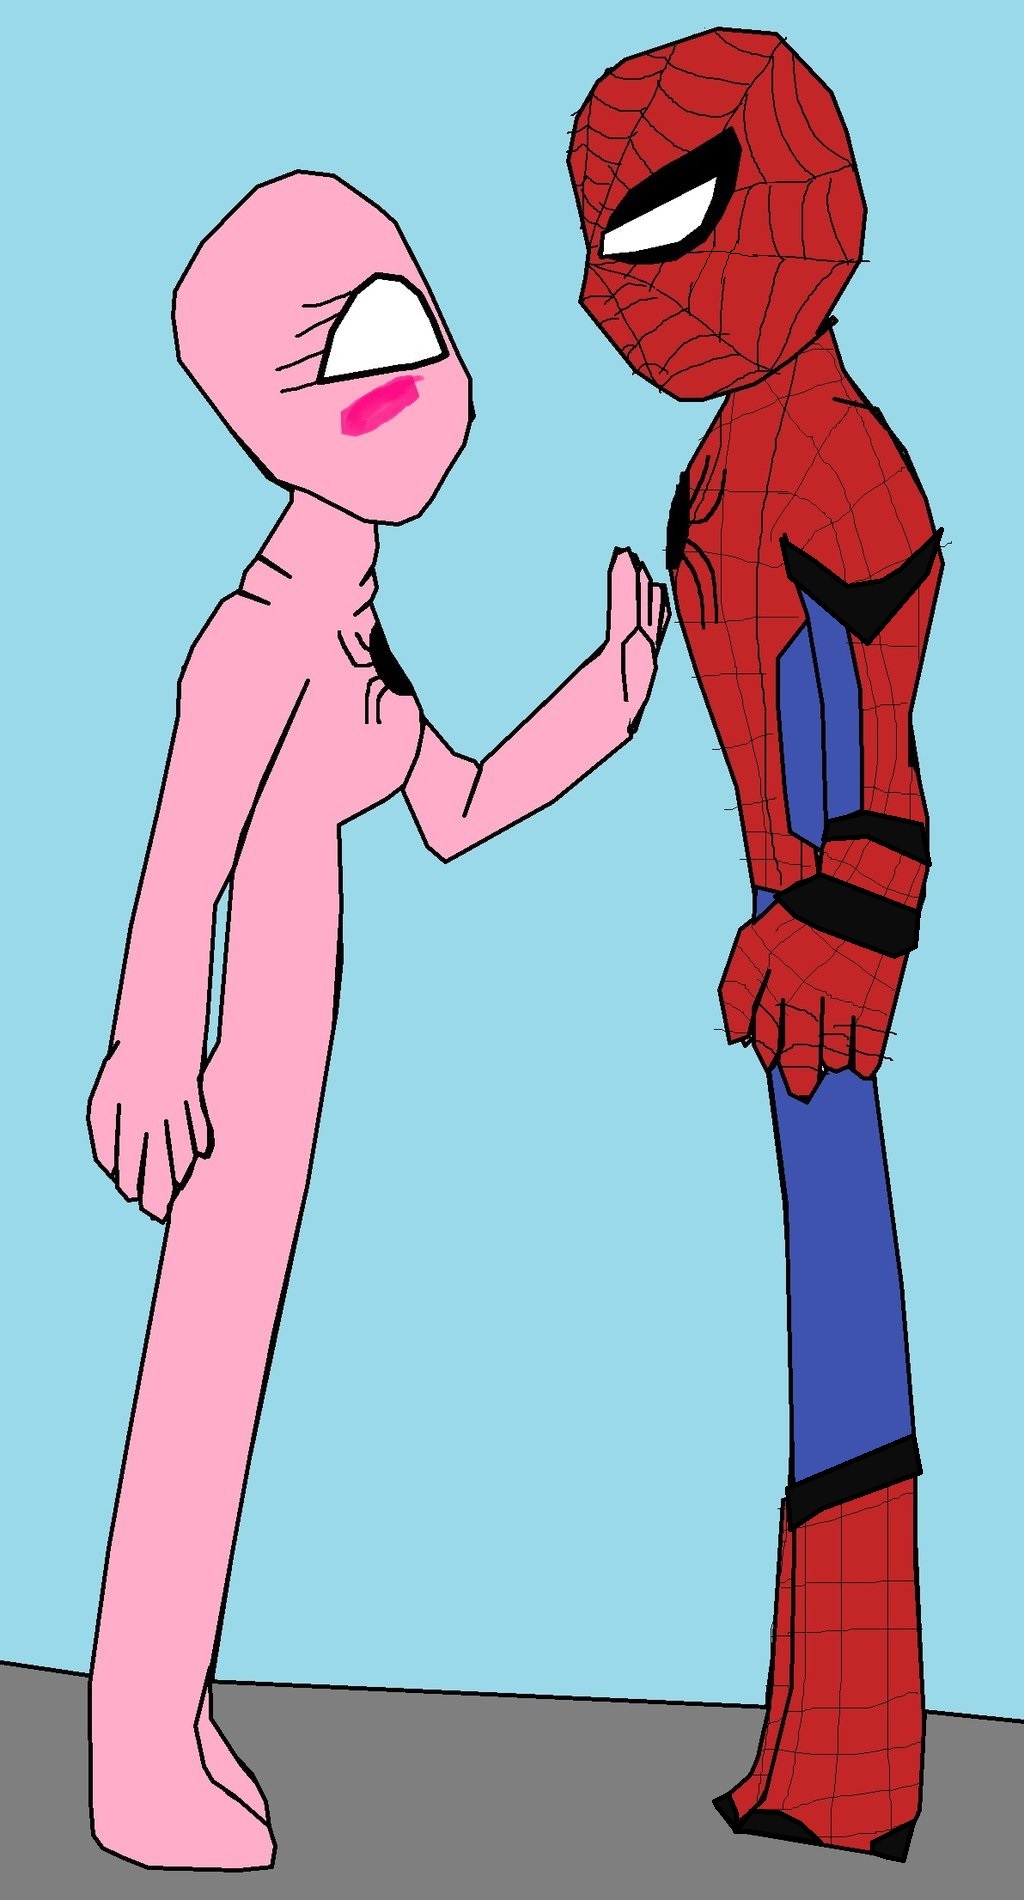 Pink Spider-Girl and Spider-Man 2 (colored) by alvaxerox on DeviantArt